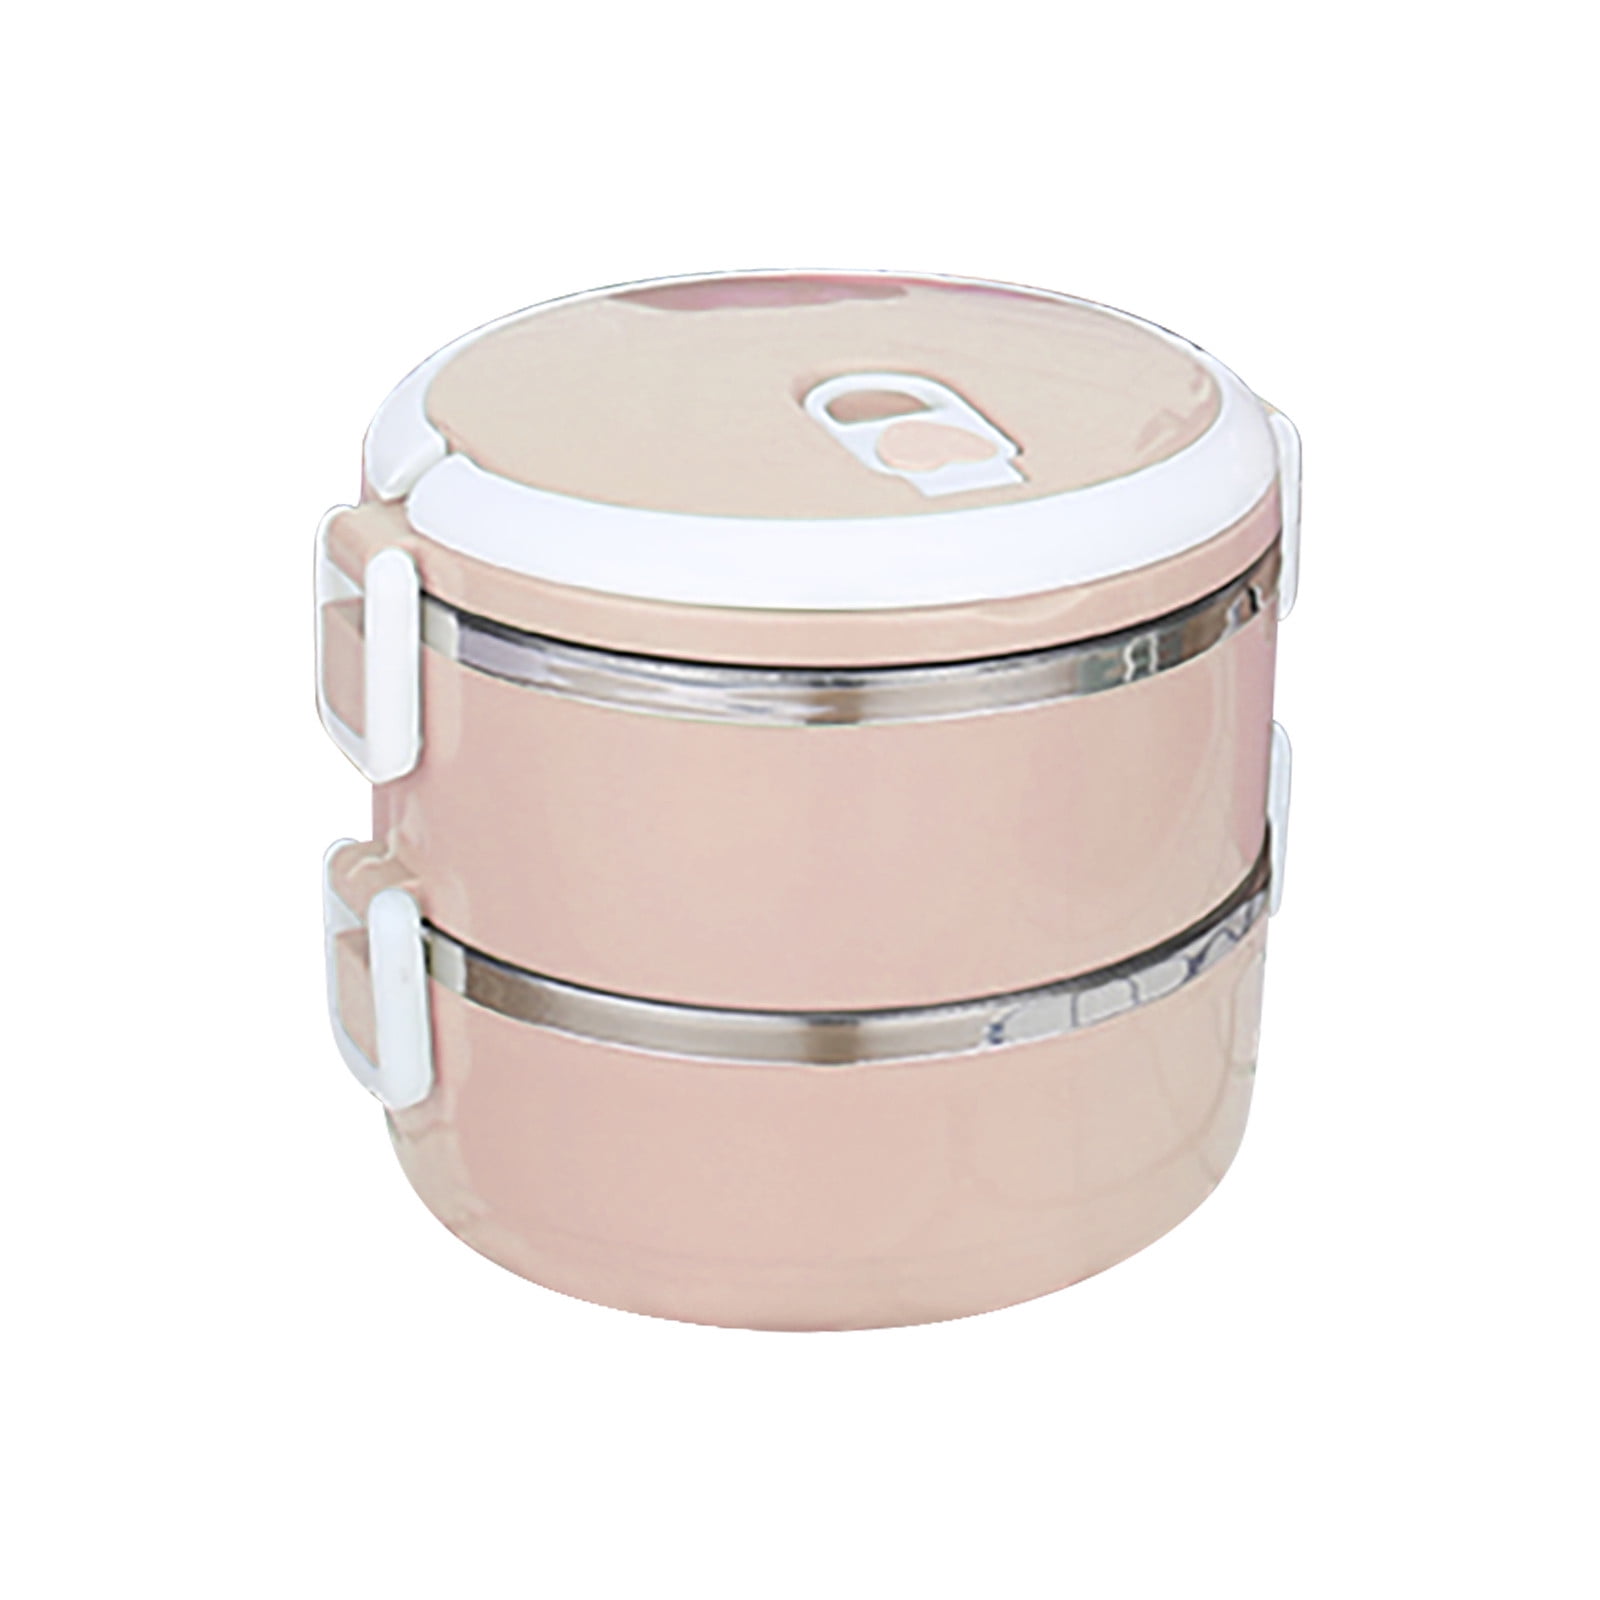 Disposable 2 Compartments Lunch Box - CPMD0093SG - IdeaStage Promotional  Products